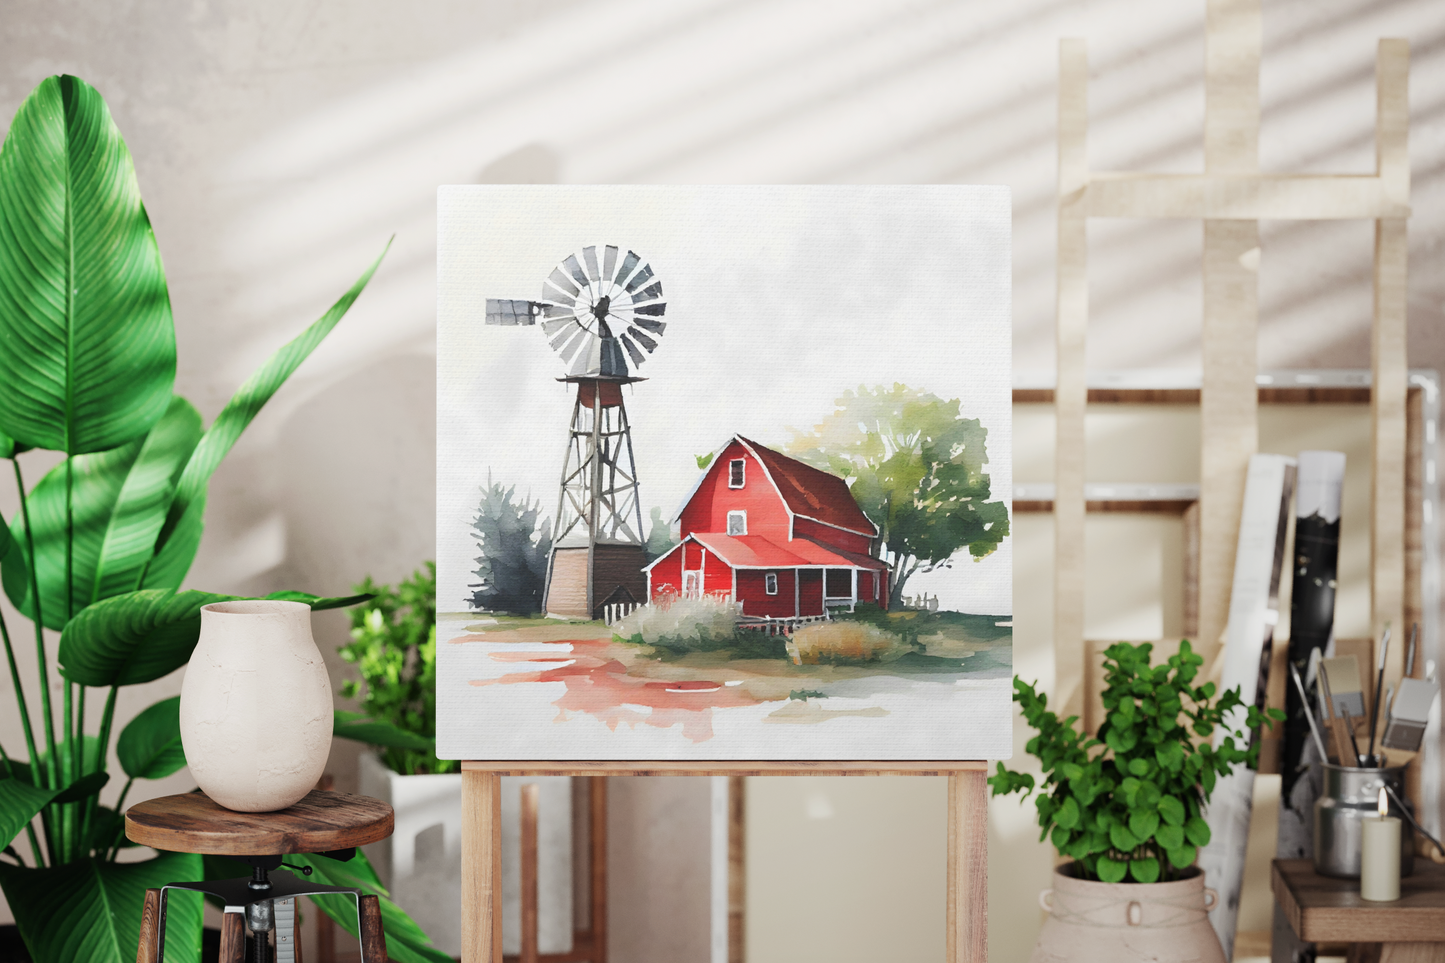 red barn with a windmill on a canvas sitting on an easel, farmhouse canvas art in a studio, red barn artwork decorating a wall in your home decor